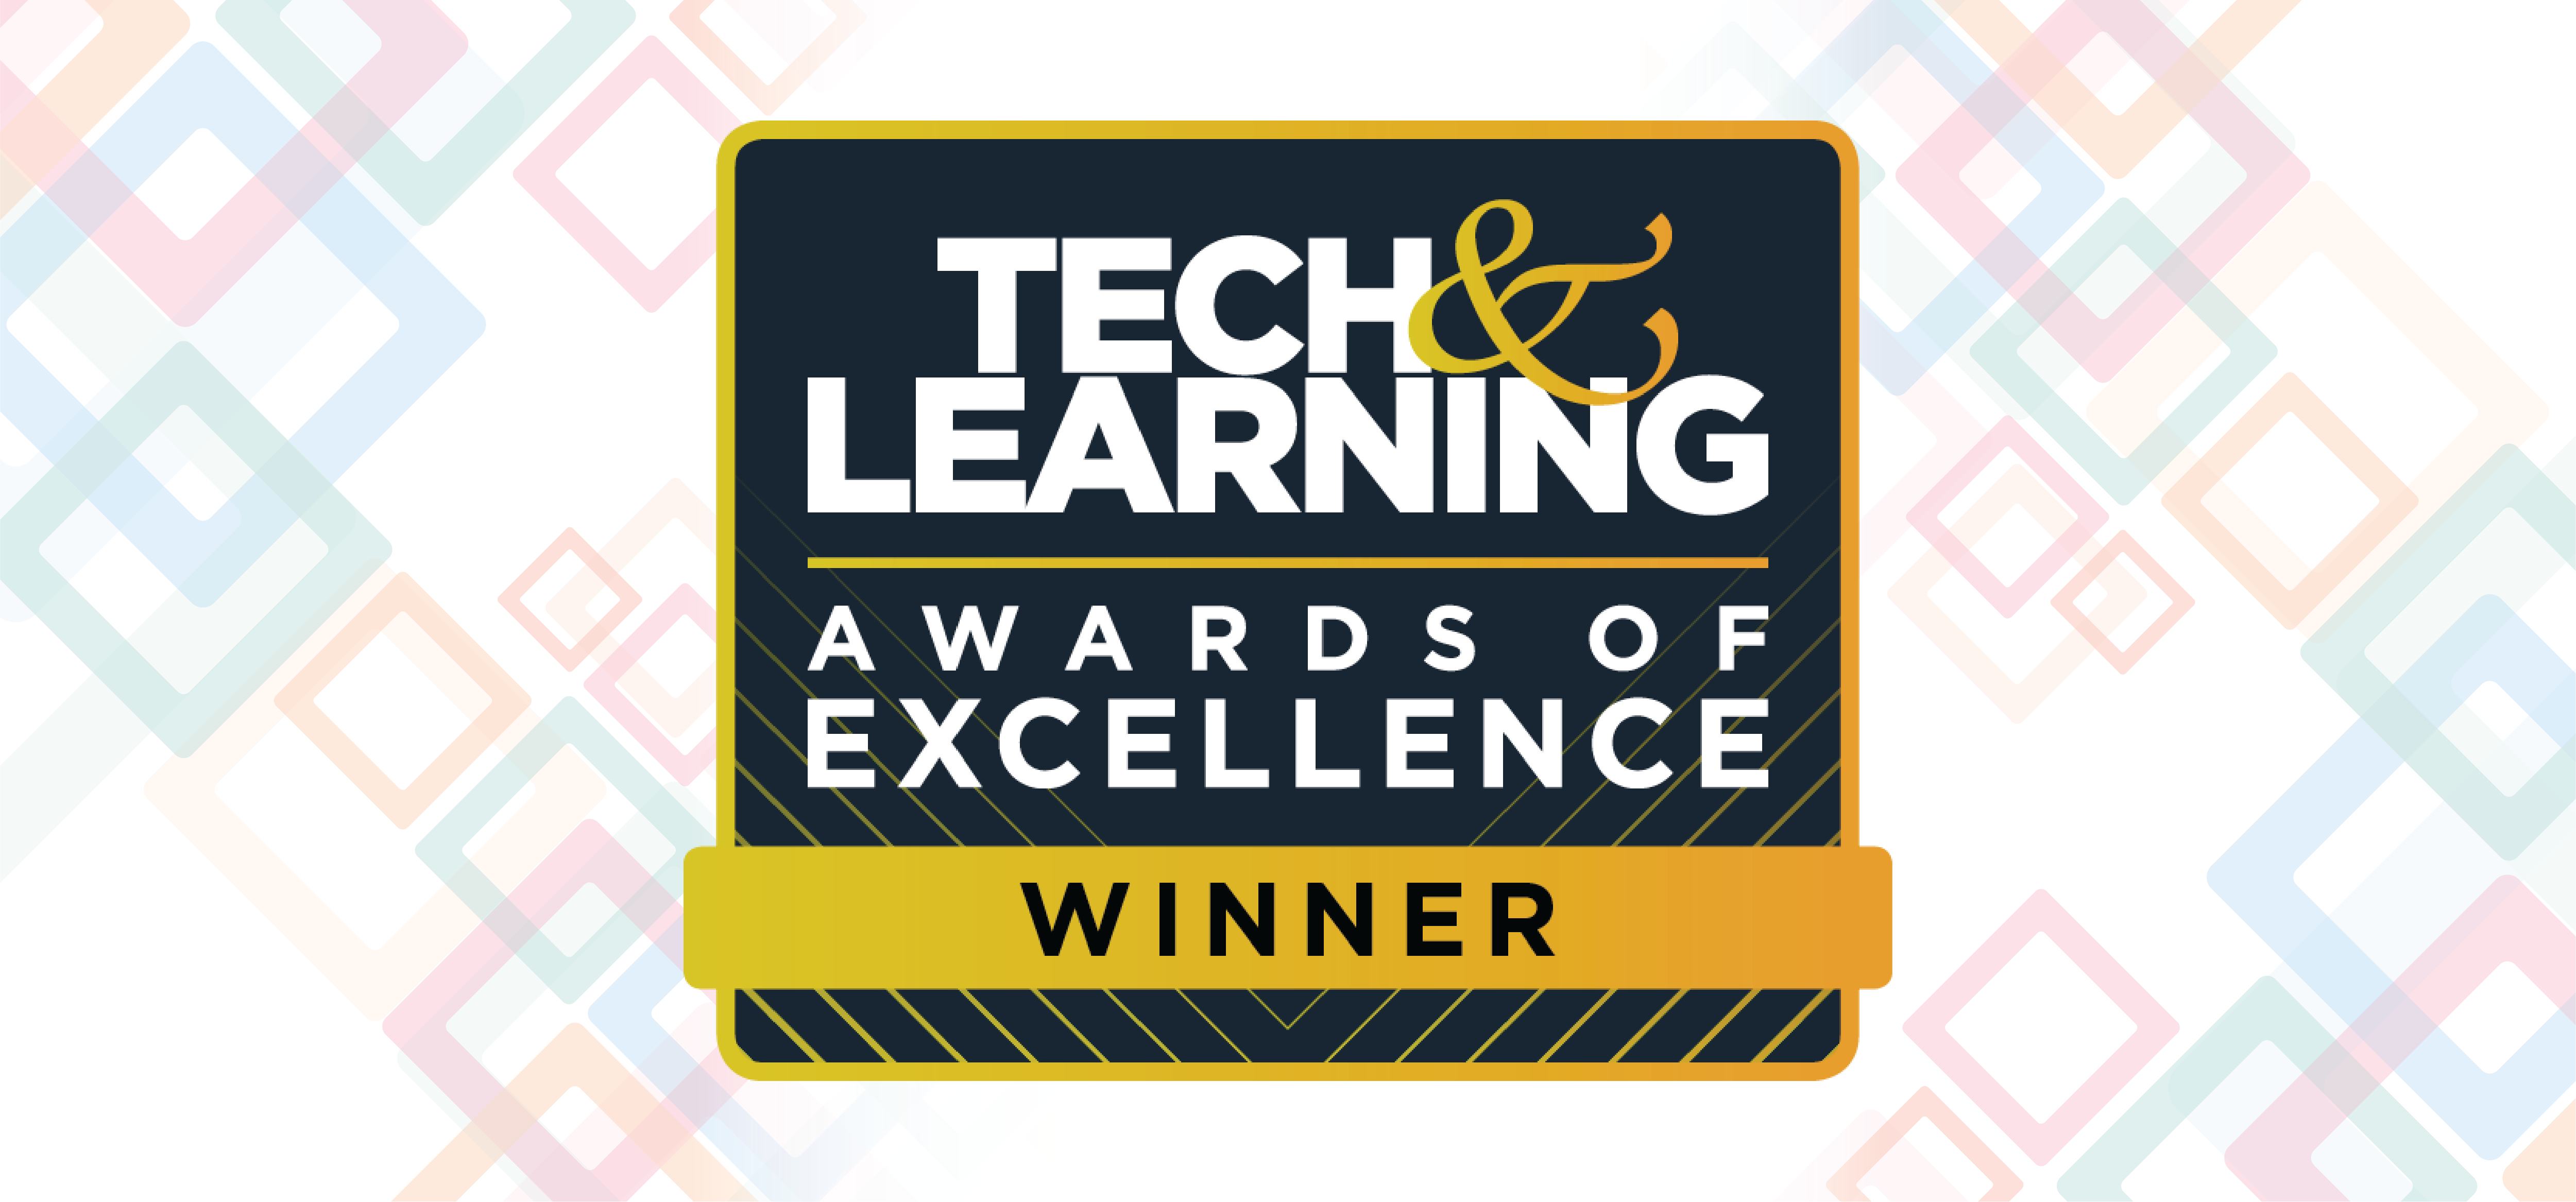 Tech and learning awards of excellence winner